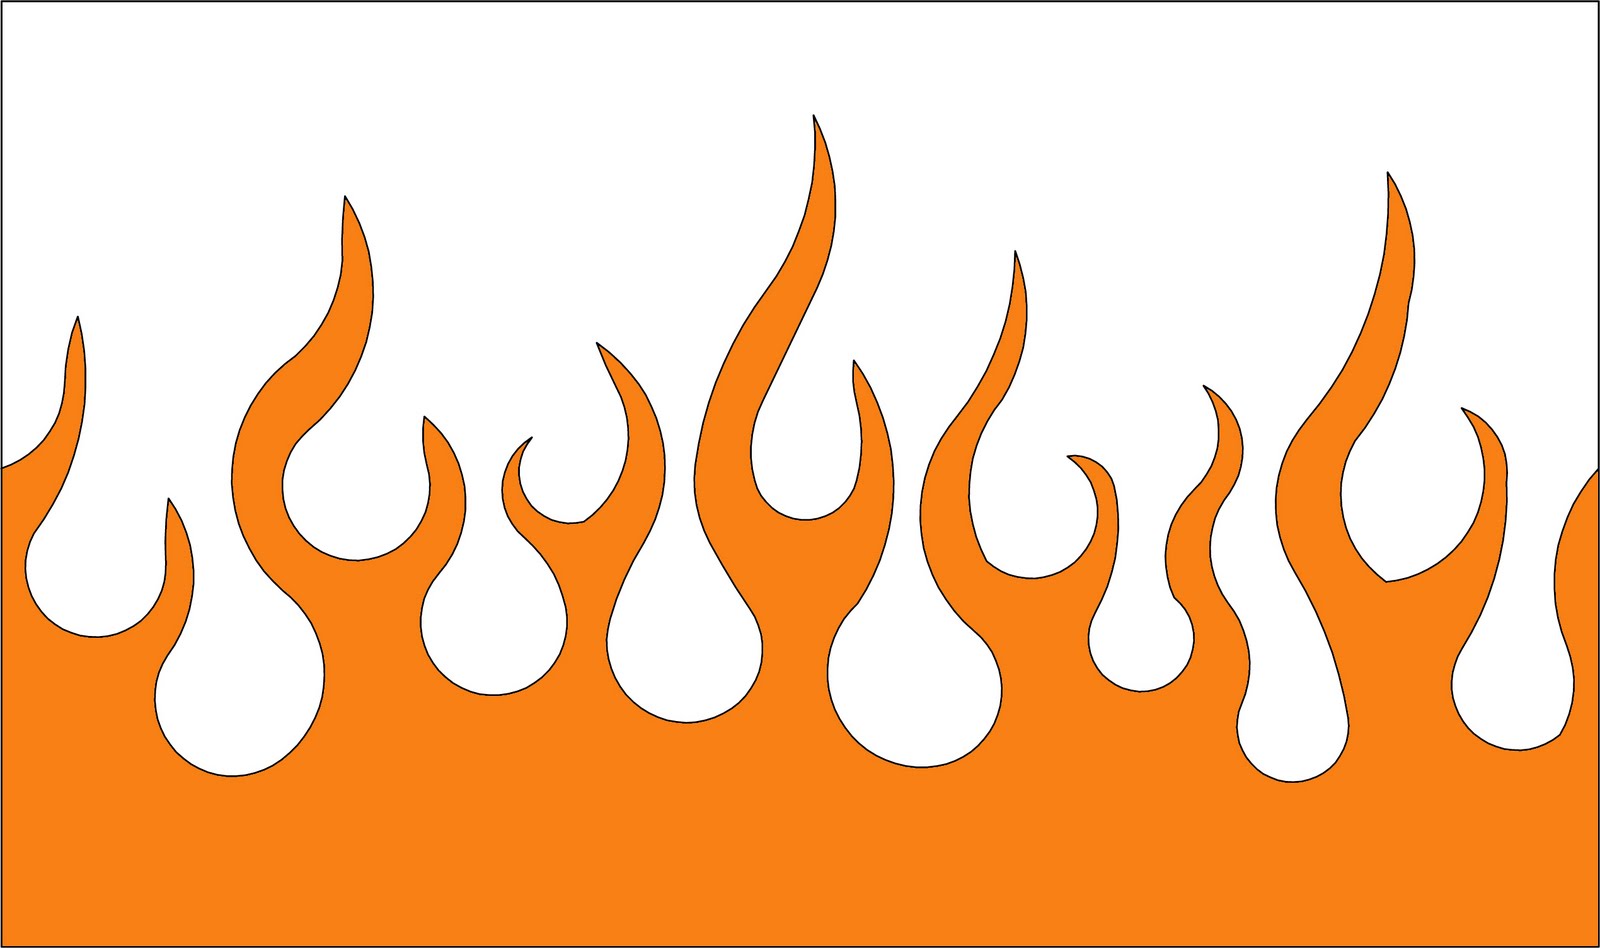 Free Flame Template, Download Free Flame Template png images, Free